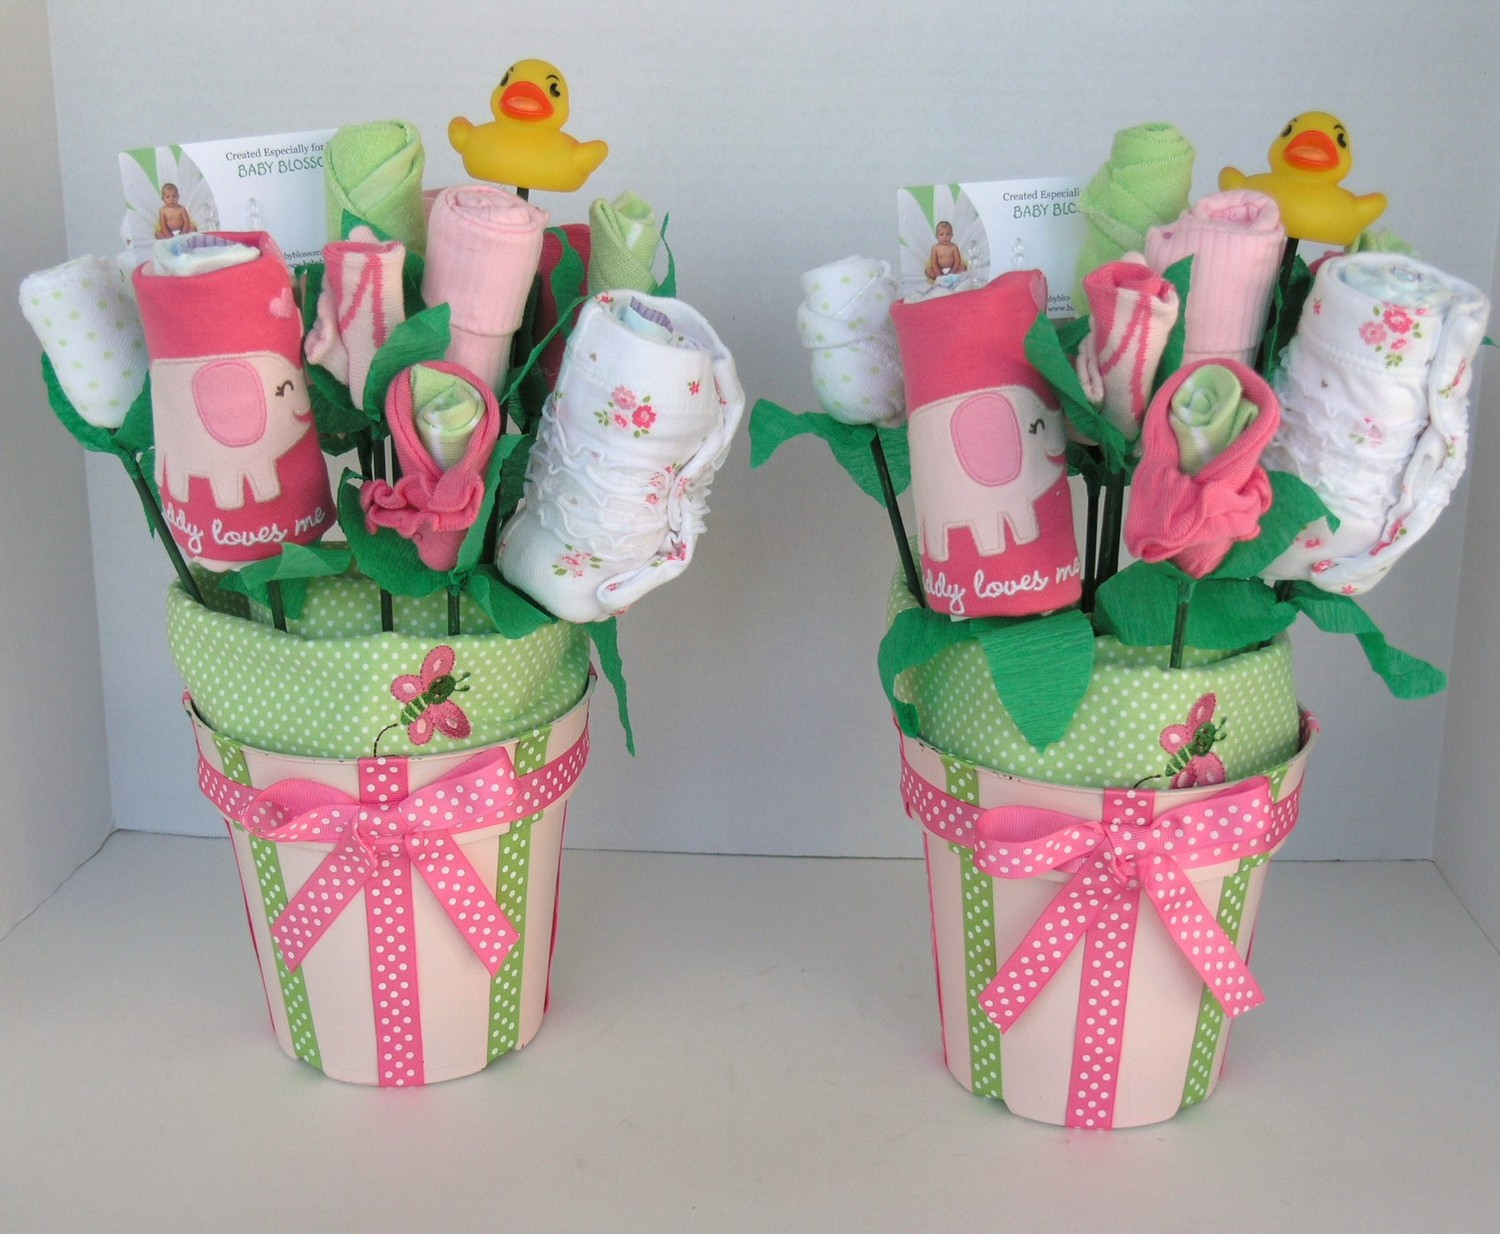 Cute Baby Girl Gift Ideas
 Five Best DIY Baby Gifting Ideas for The Little Special